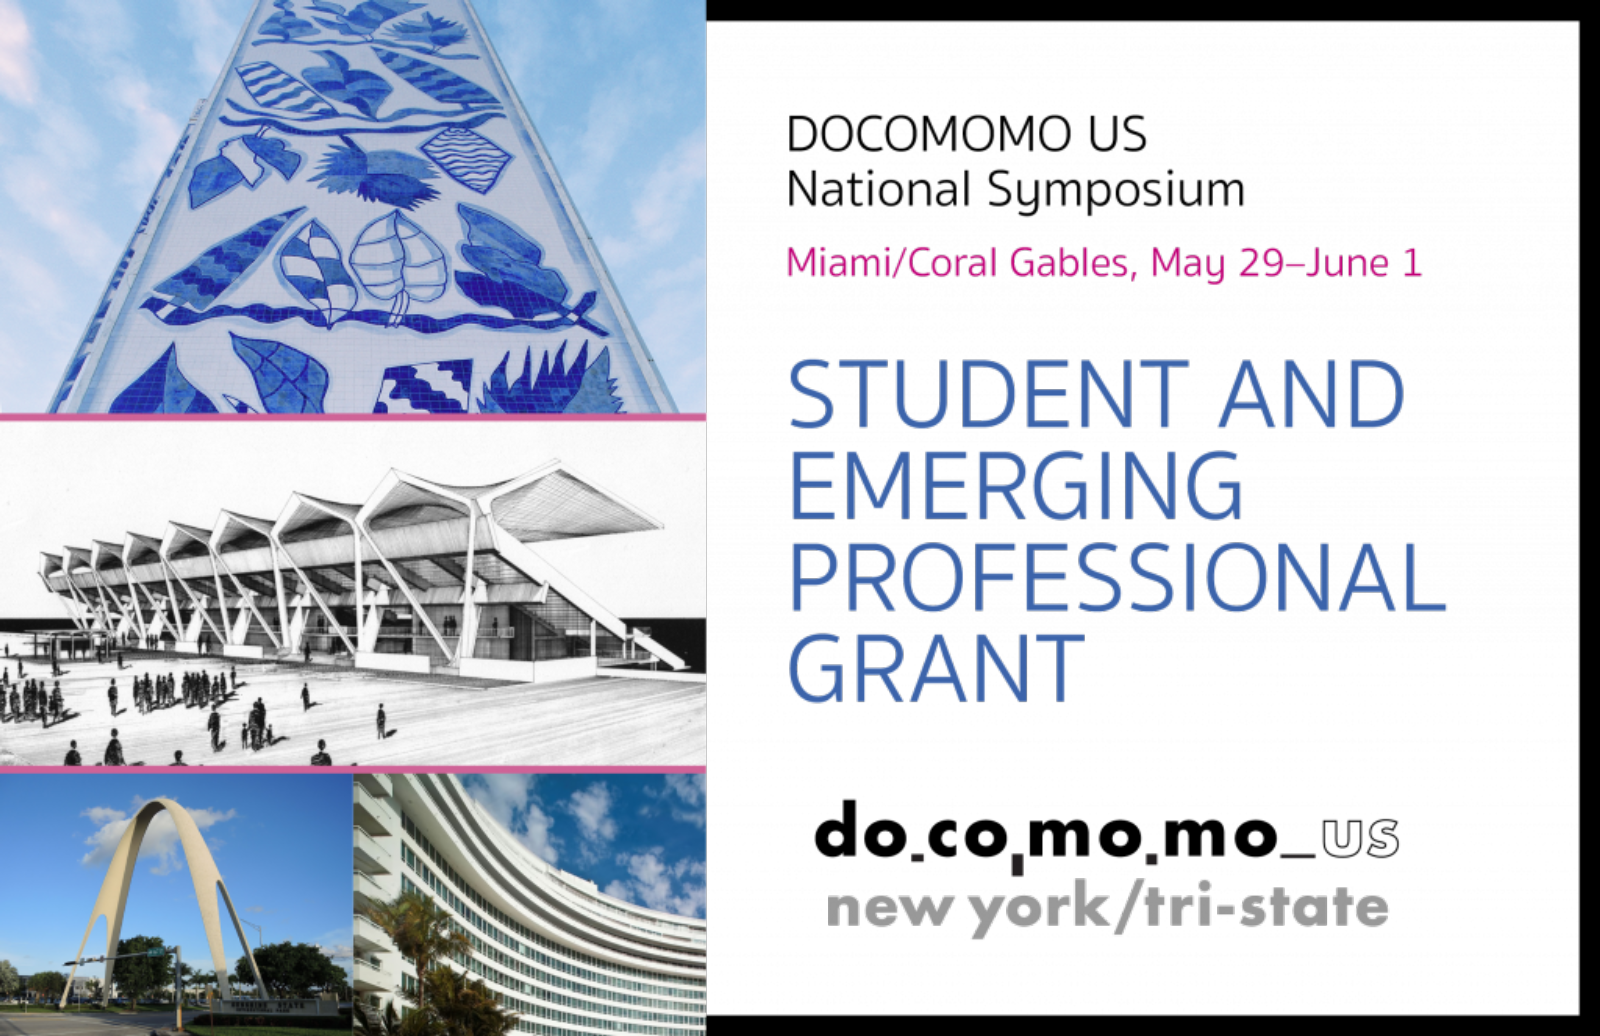 ny/tri-state grant details